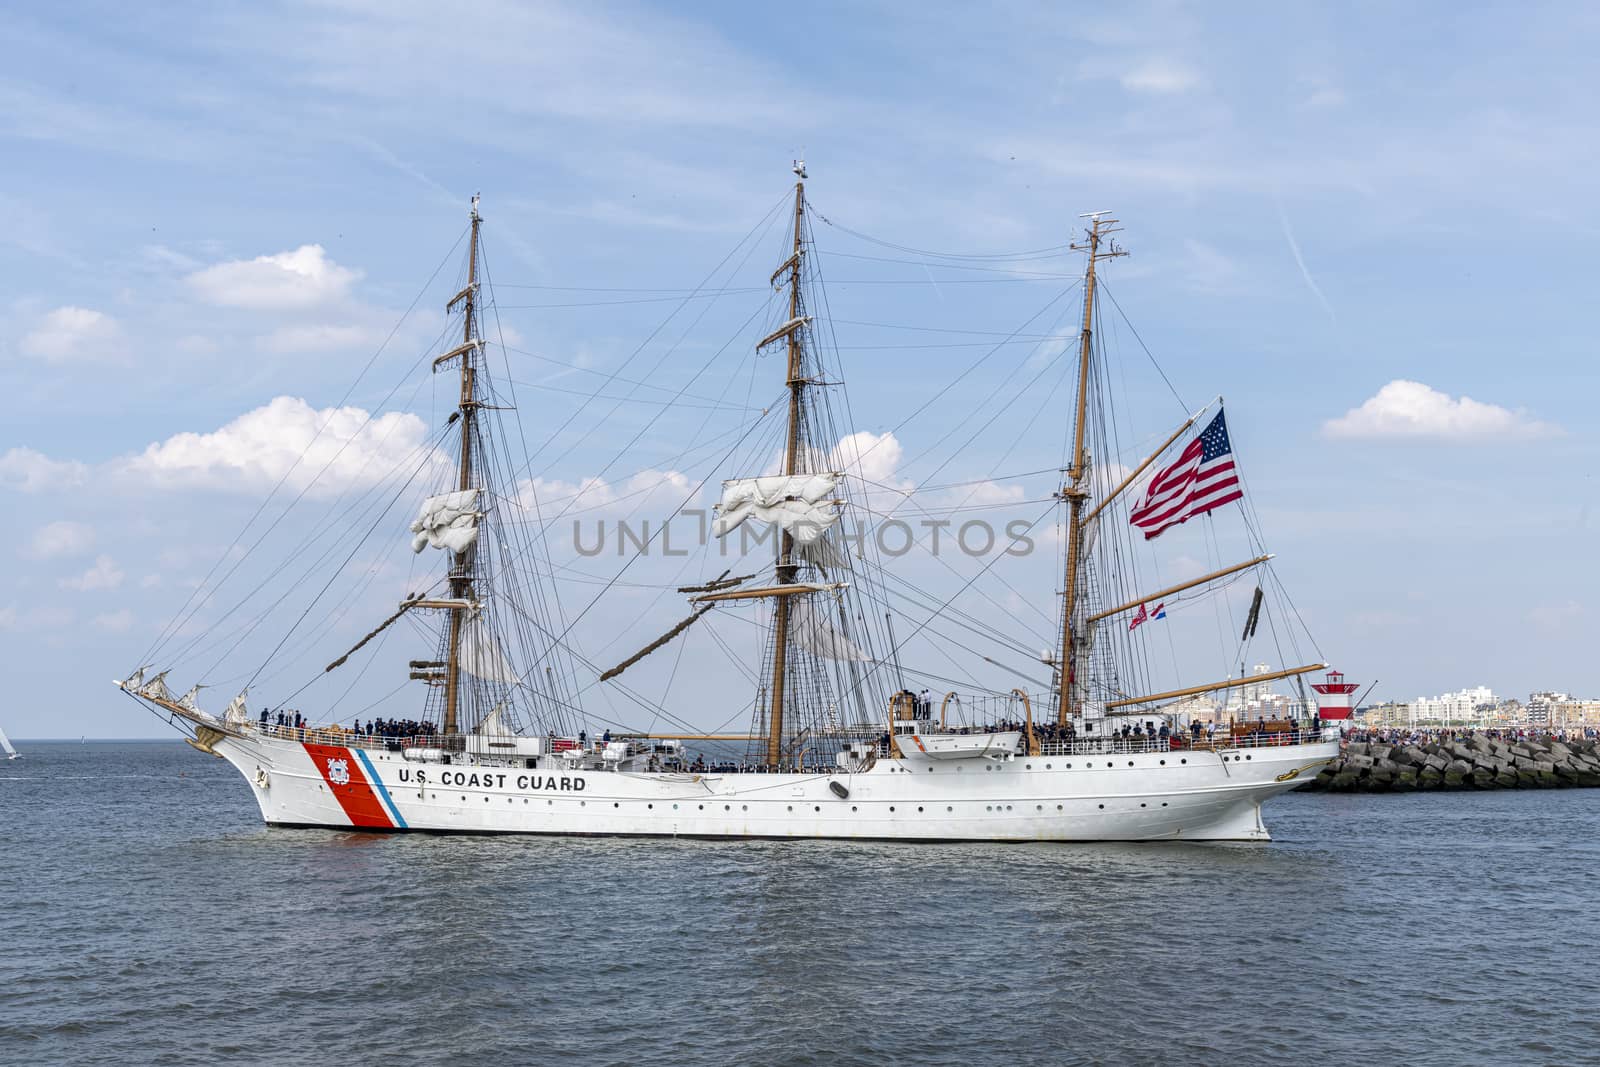 THE HAGUE, 23 June 2019 - US Coast Guard antique tall ship, vessel leaving the harbor of The Hague, Scheveningen under a sunny and blue sky by ankorlight